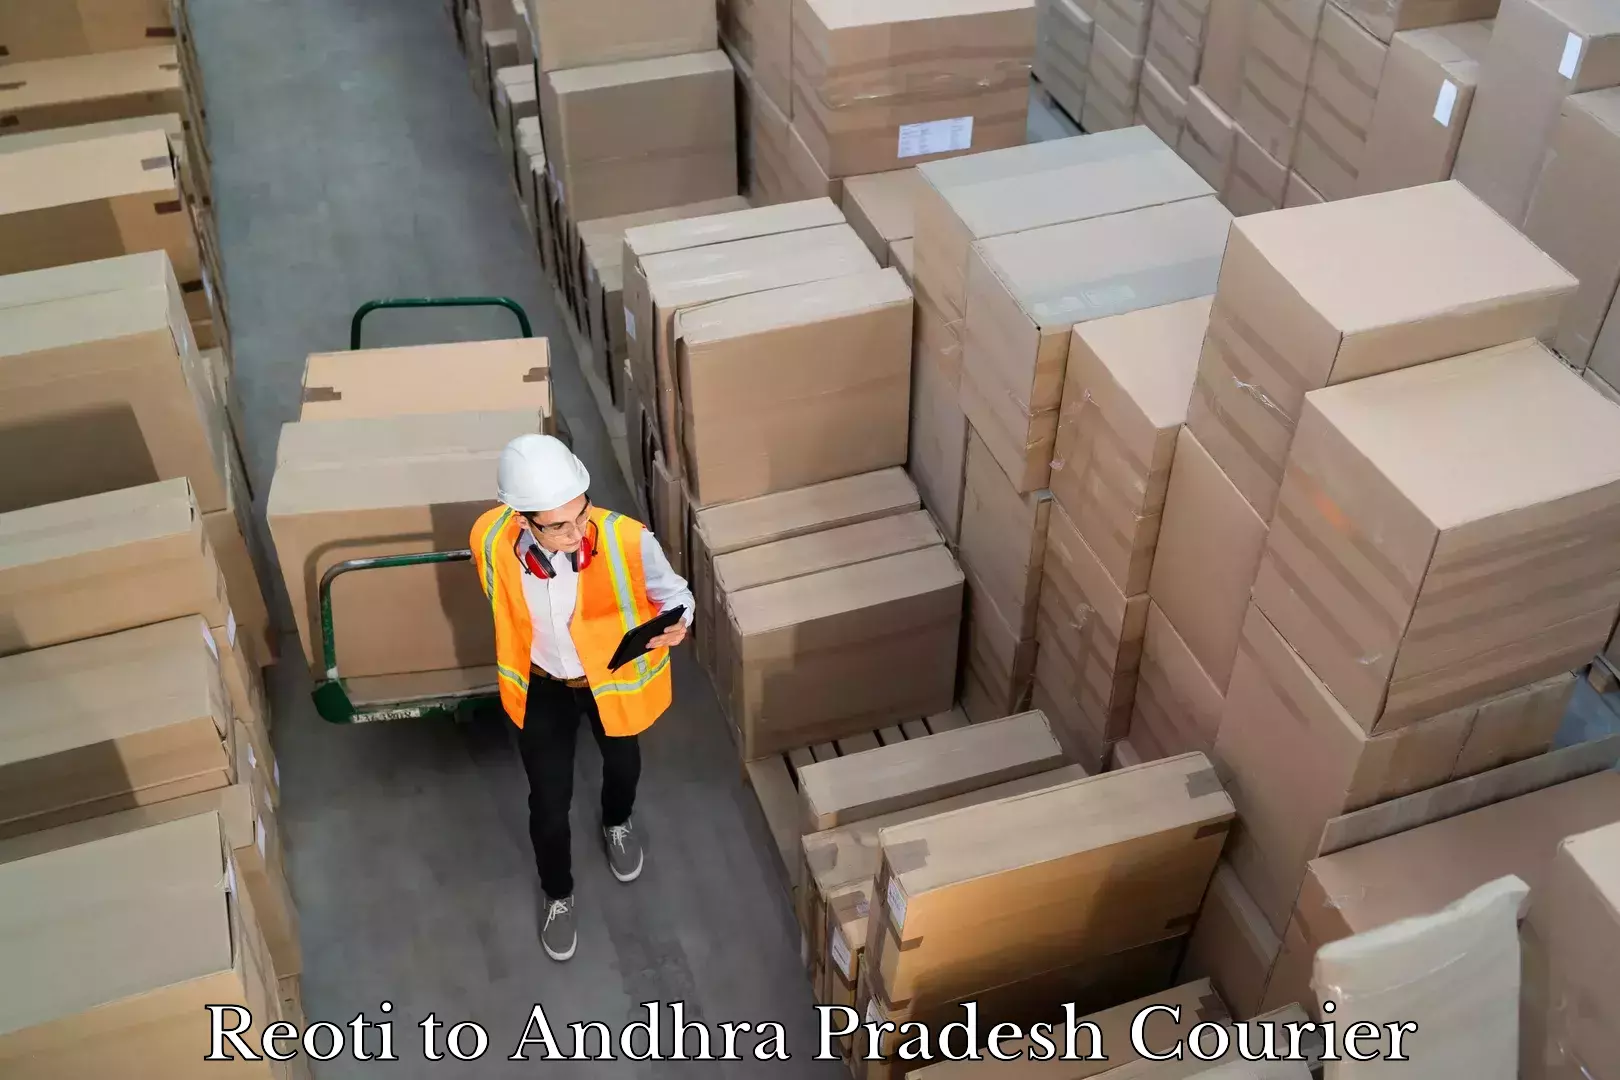 Corporate courier solutions Reoti to Andhra Pradesh